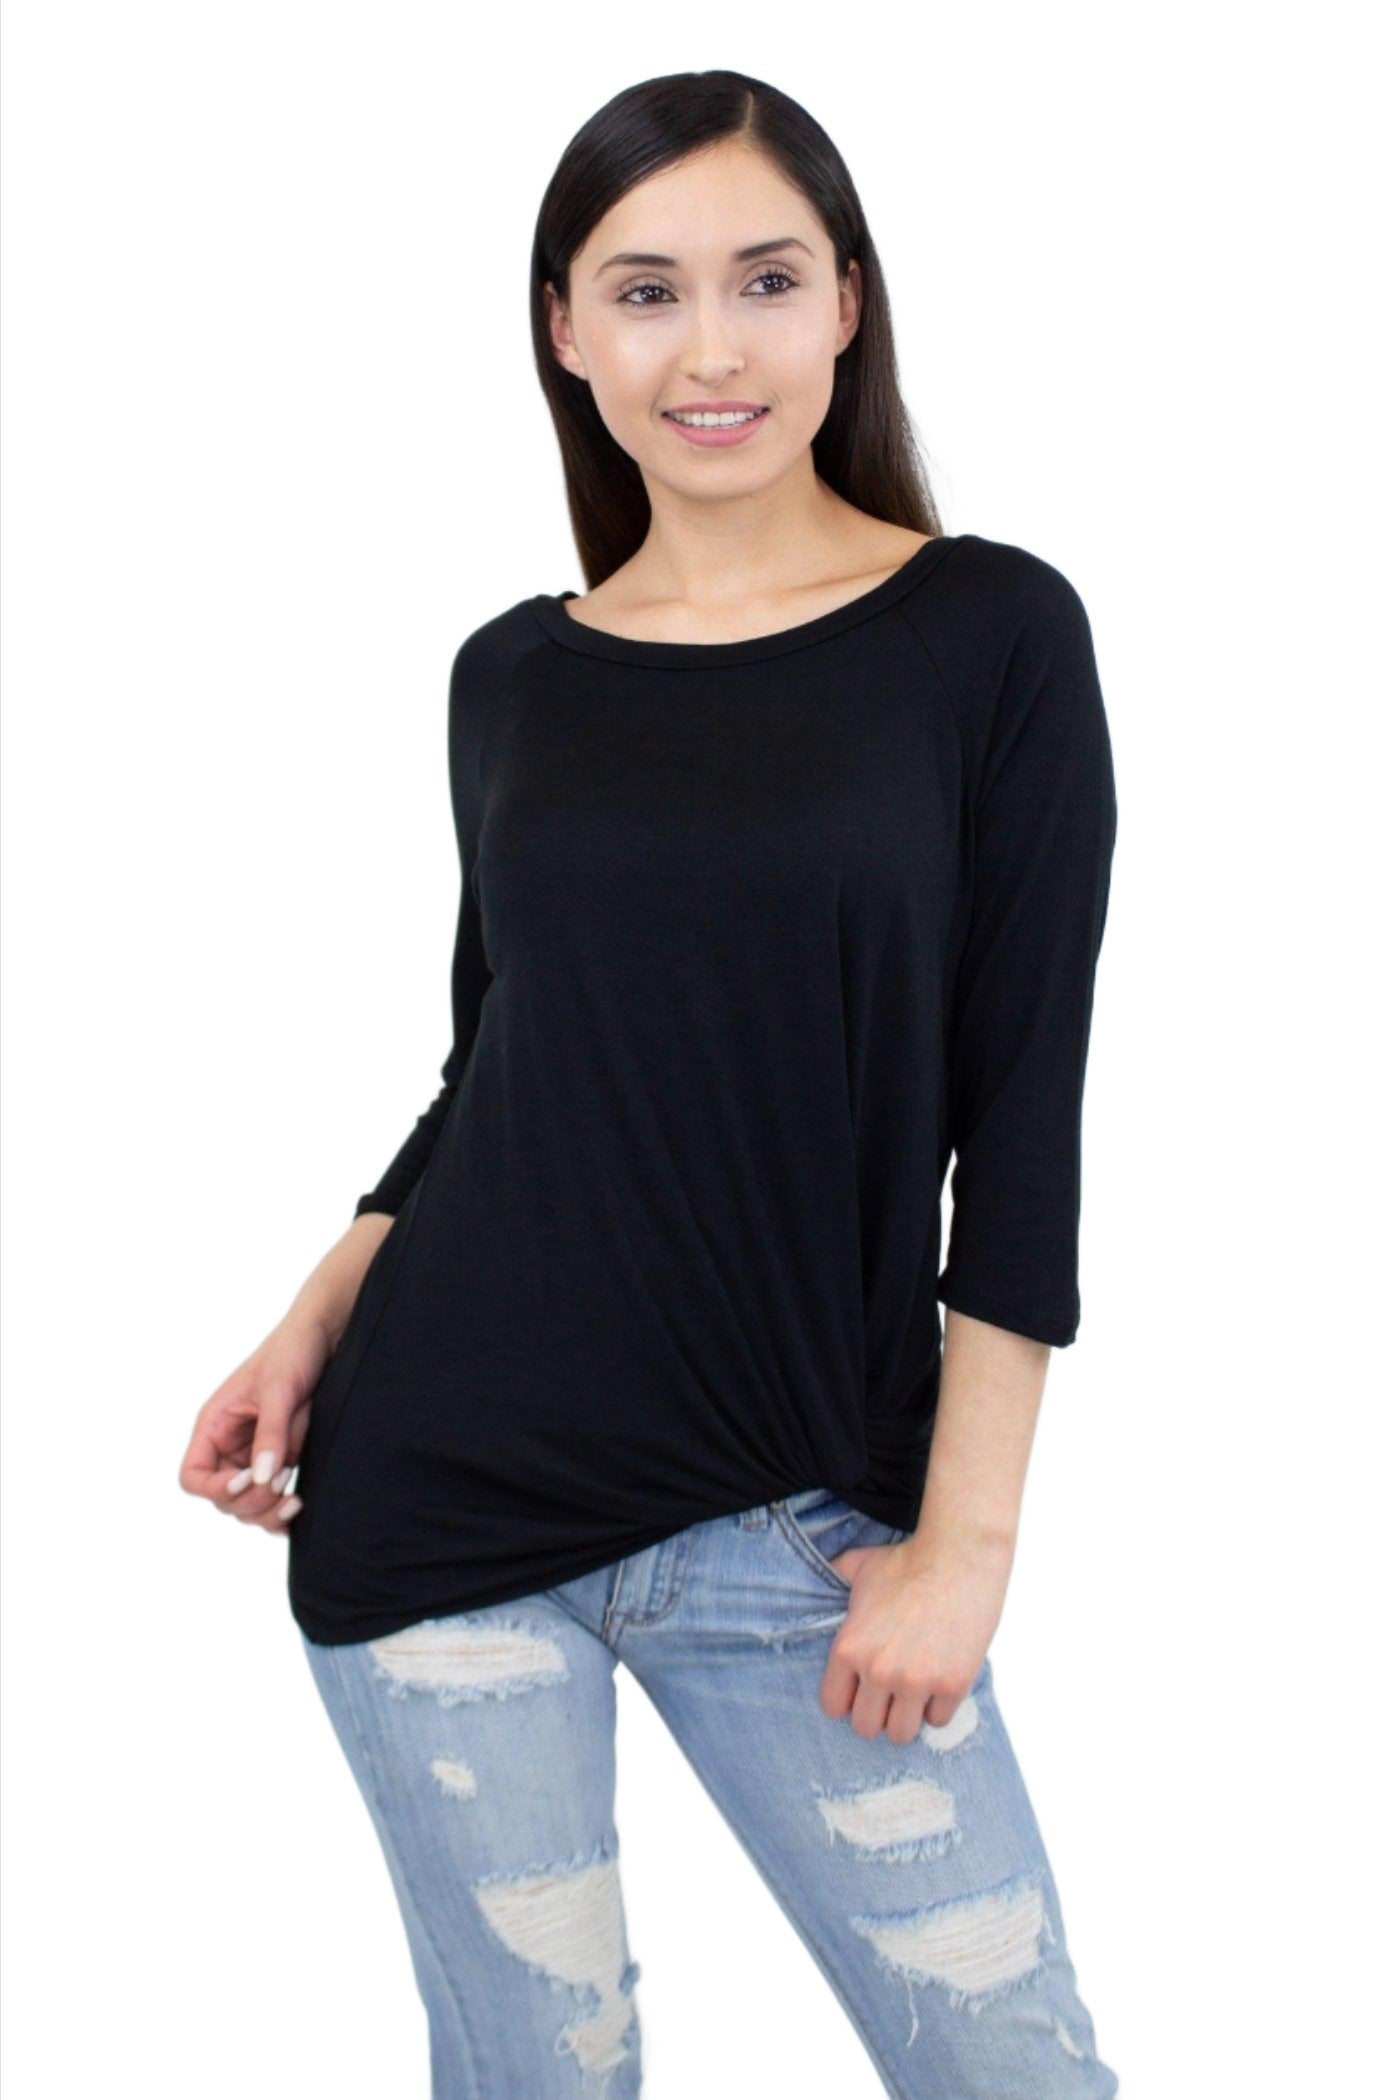 Women's Shirts Twisted Front Comfortable Top - Black